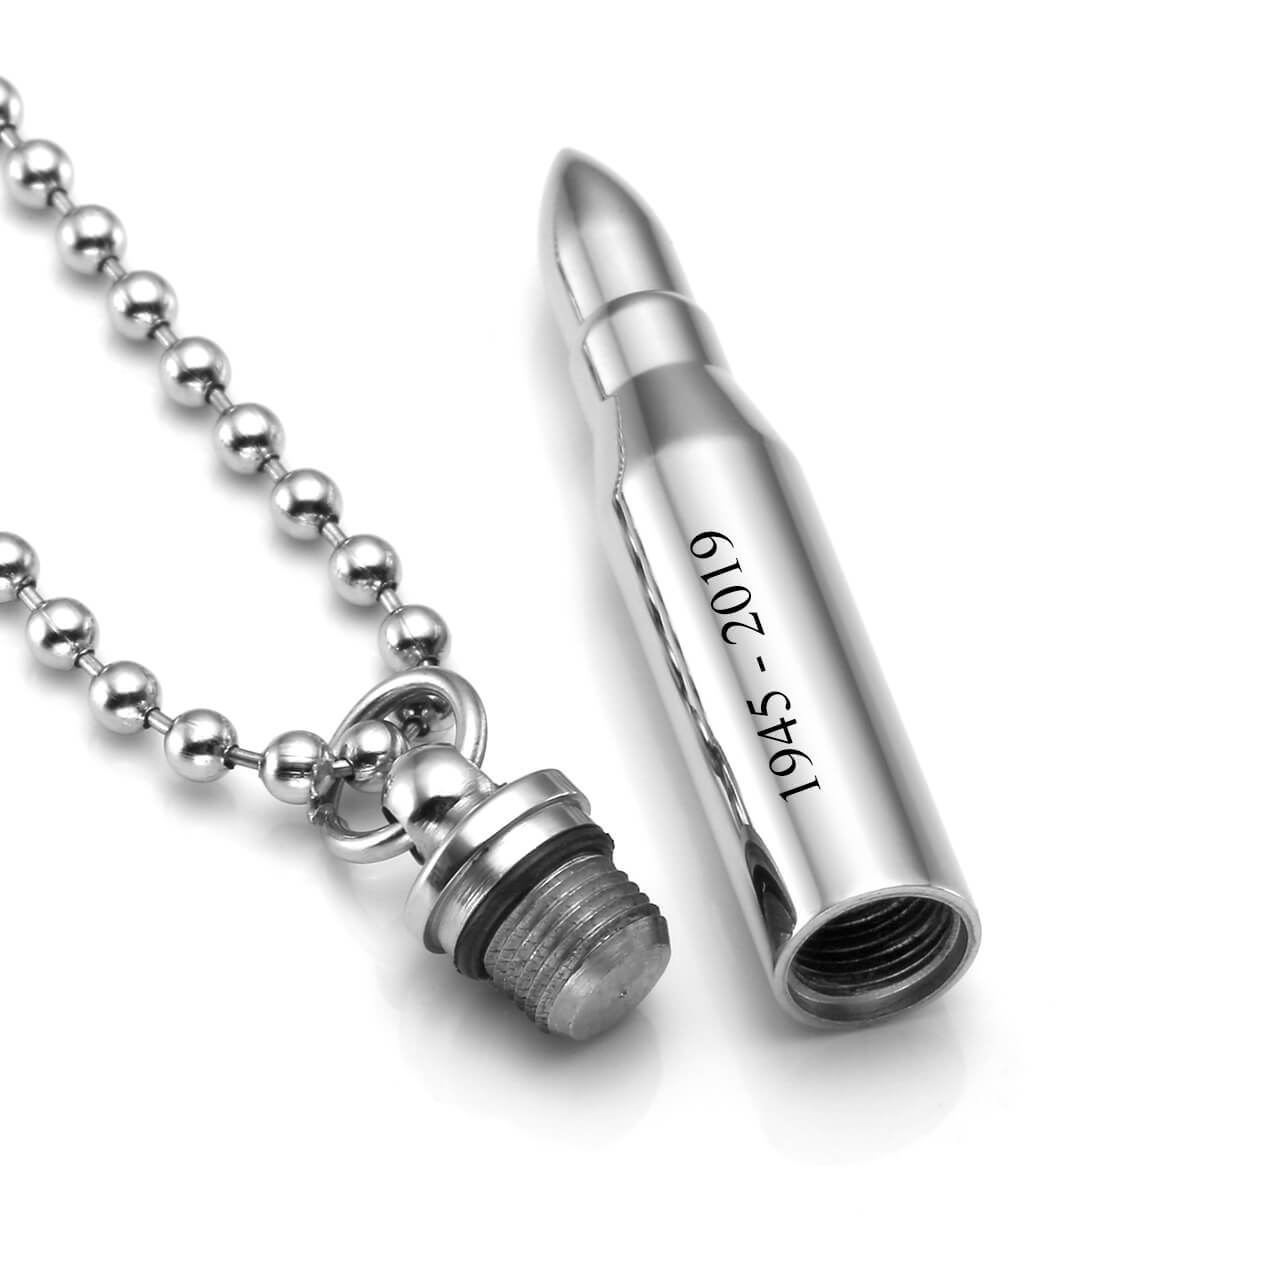 Zancan silver bullet necklace with black stones.